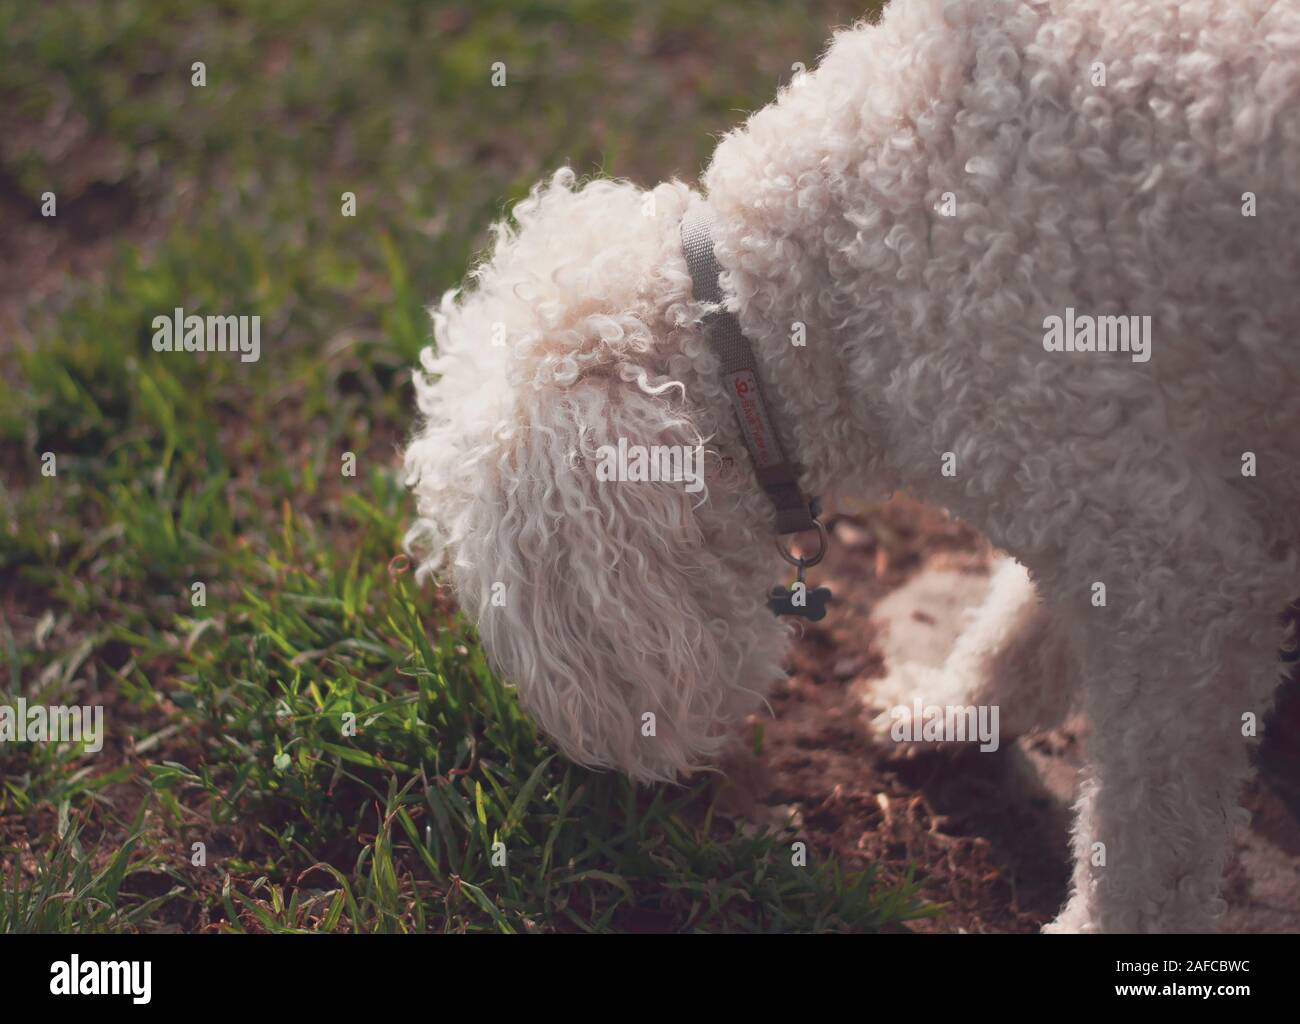 White poodle with a colar sniffing on a grass patch Stock Photo